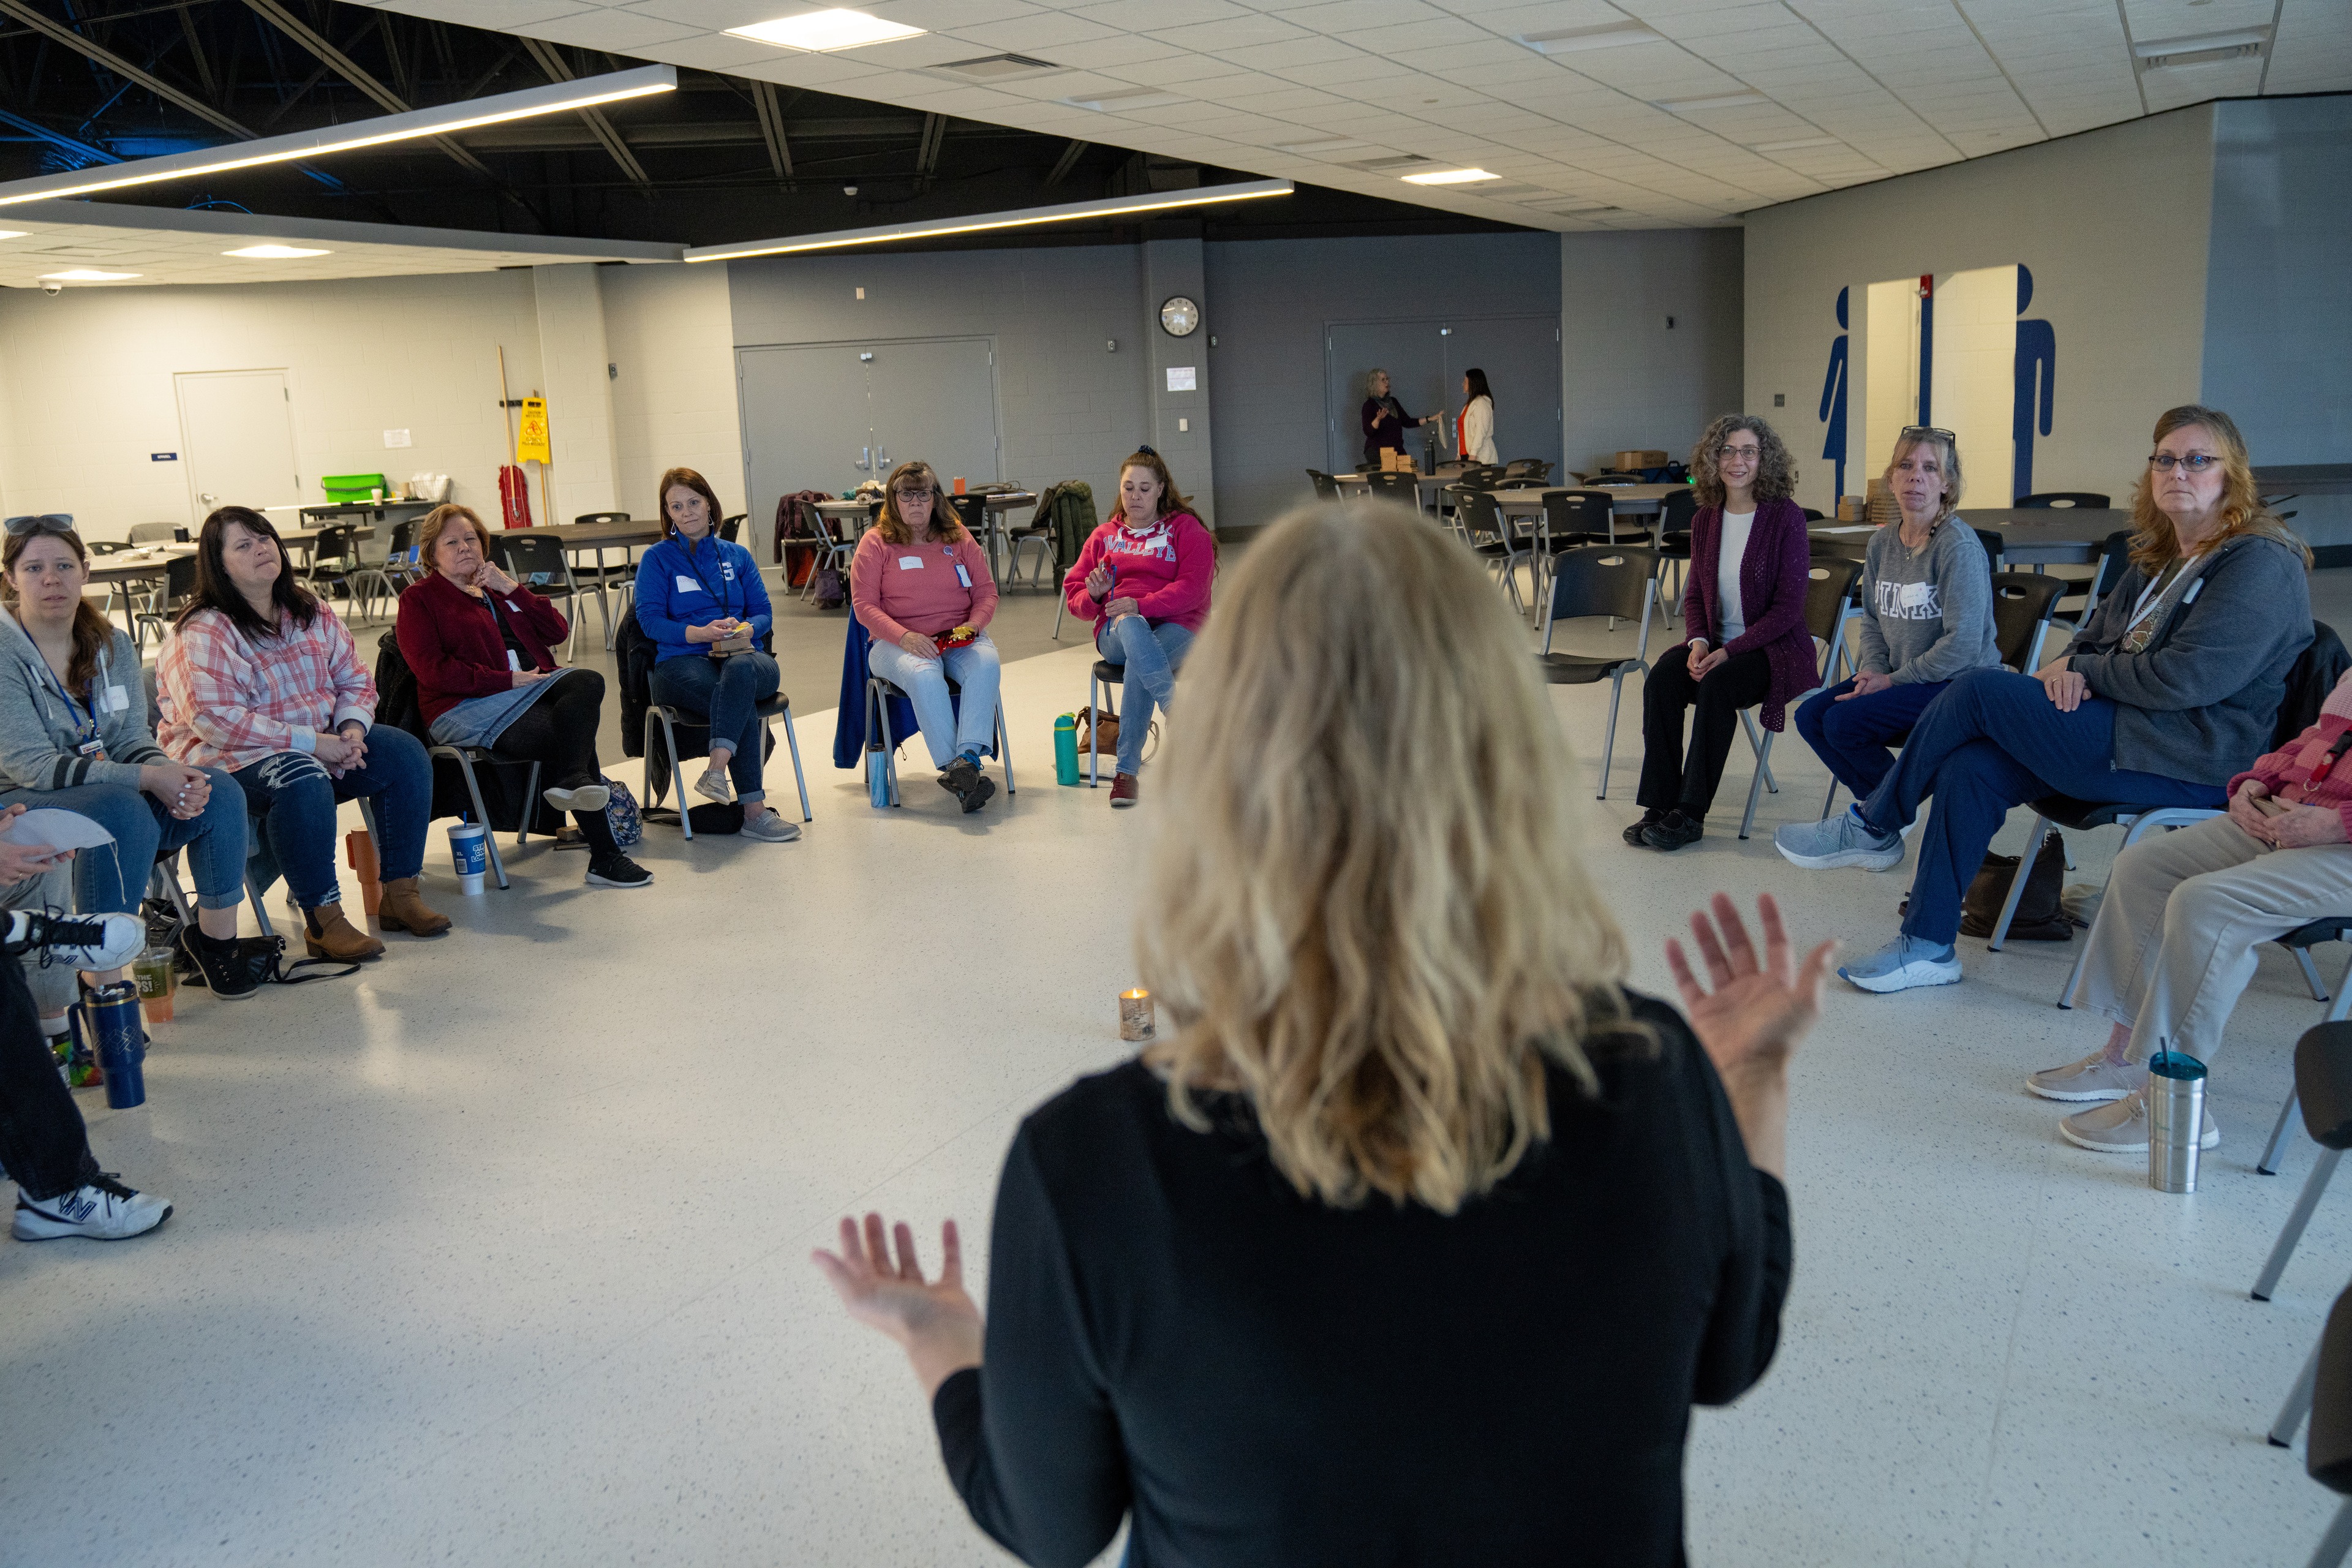 A person addresses a group of people sitting in a circle.